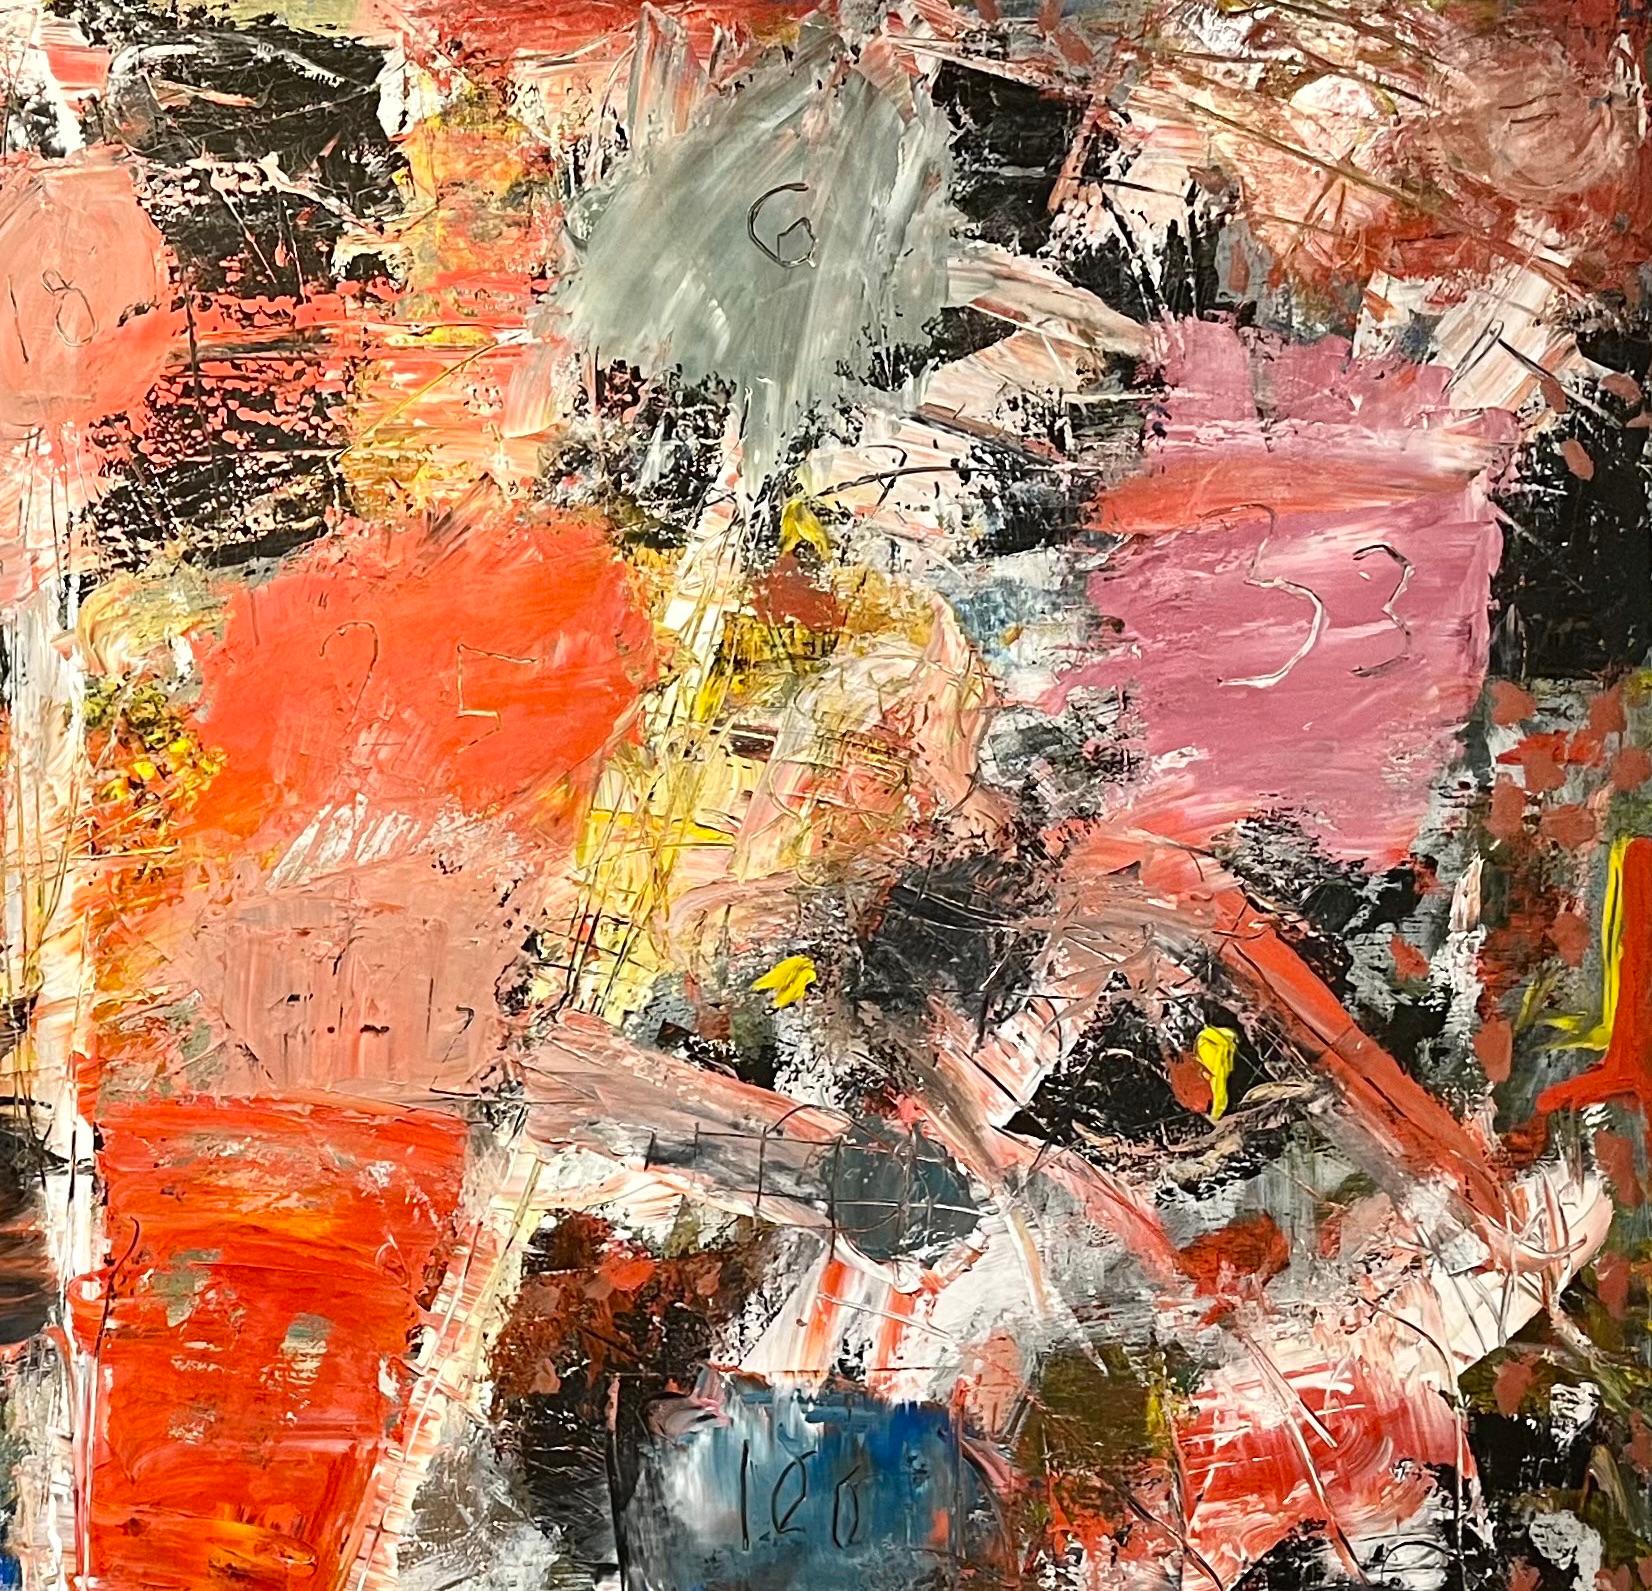 This monumental abstract oil painting by late Houston artist Dick Wray exhibits a striking kinetic energy. Thick layers of paint foster a remarkable tactility commonly found in Dick Wray’s artwork. The treatment of the oil reflects a tendency toward